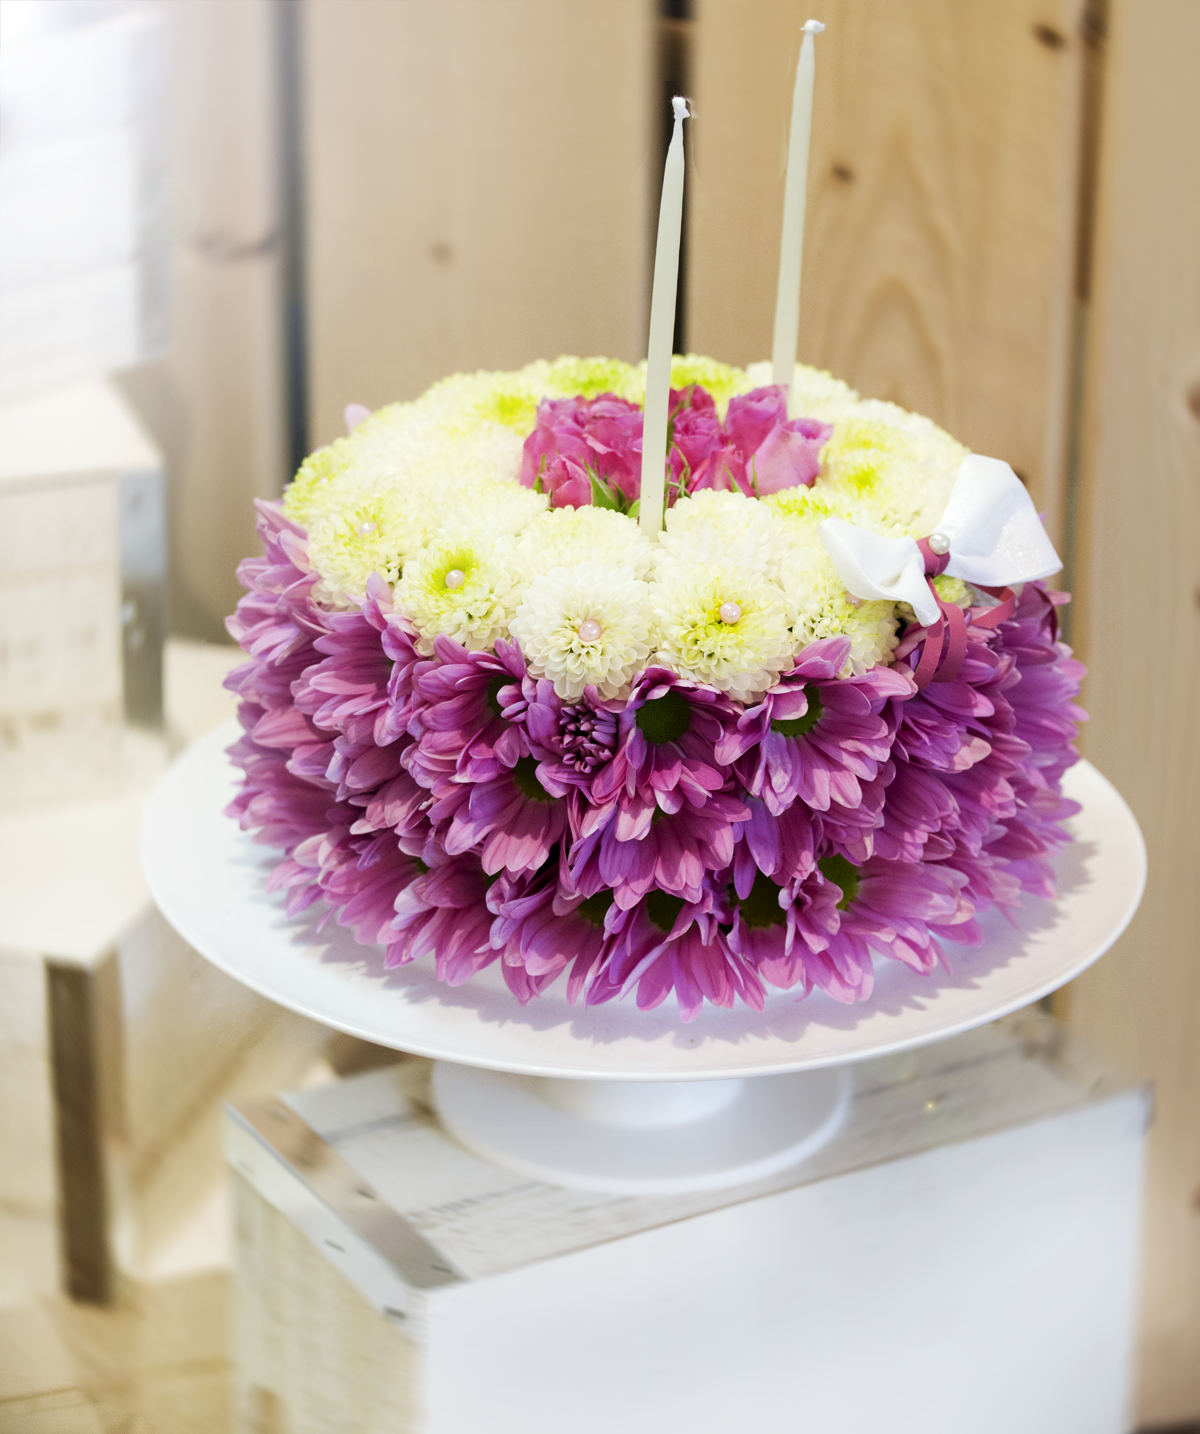 Unique gifts made of fresh flowers @Toy Florist.com ...